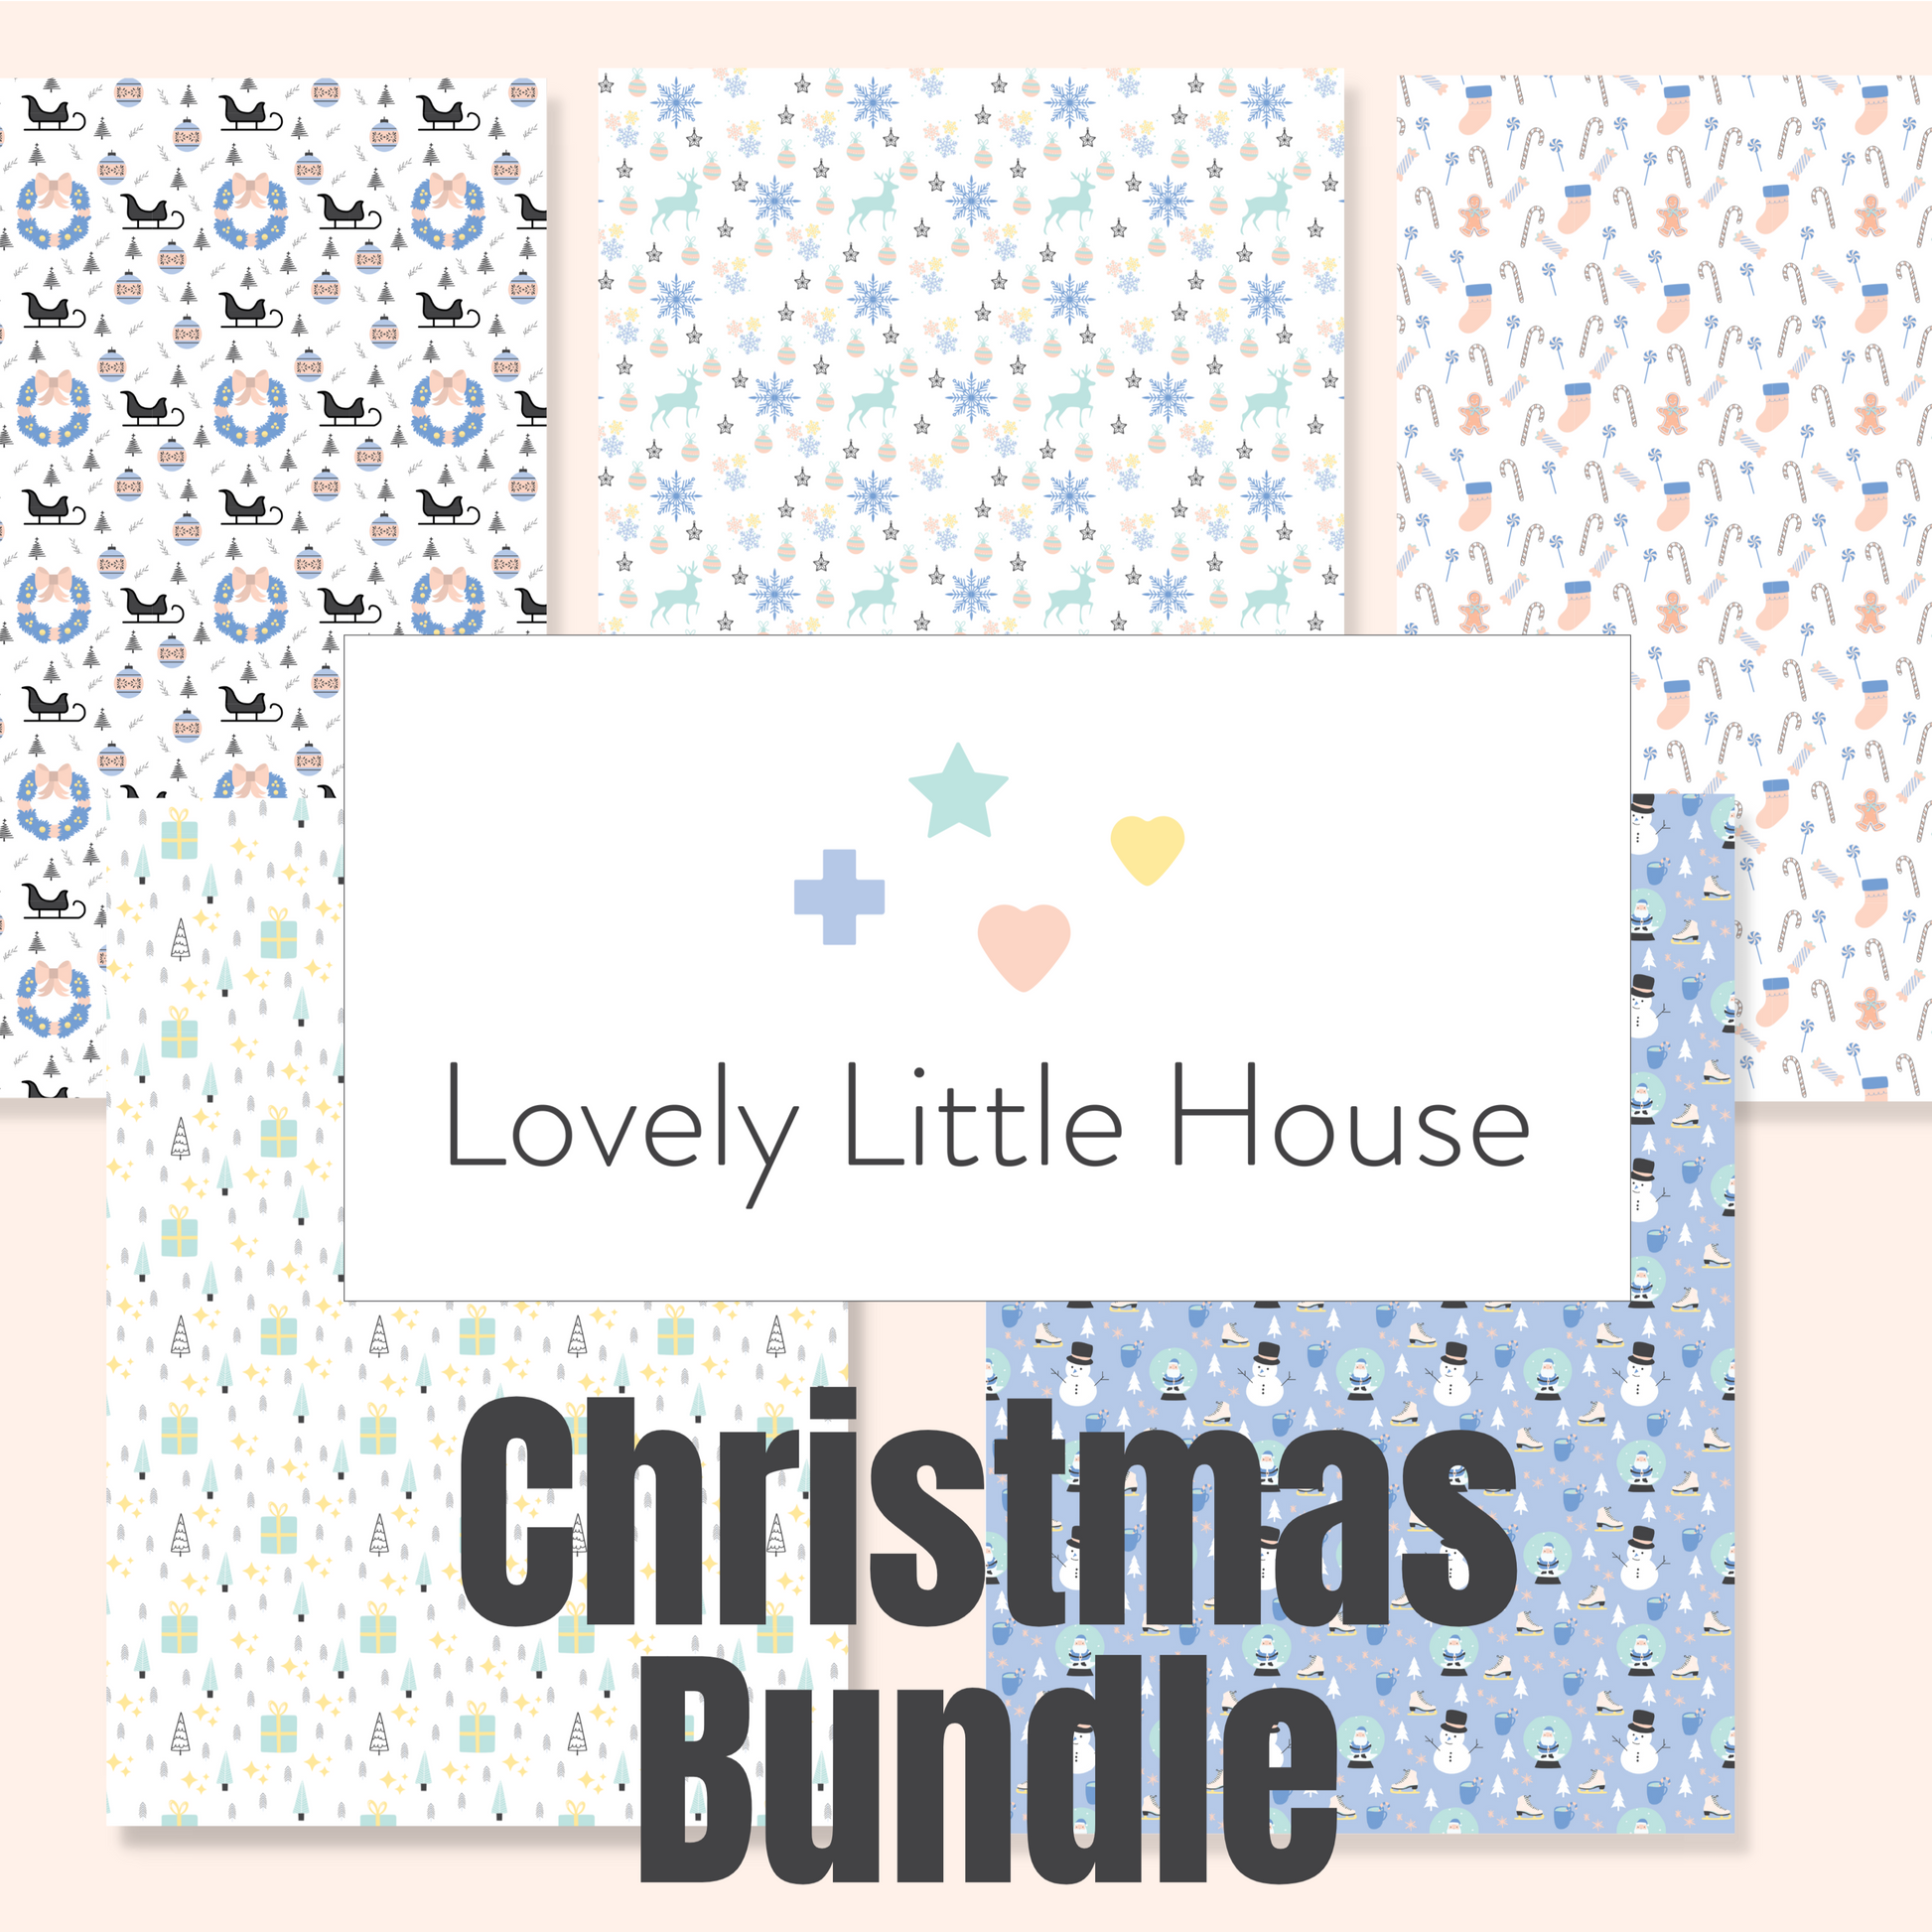 5 dollhouse wallpaper sheets with 5 different Christmas patterns with festive Christmas motifs: Christmas tree, Santa, gifts, snowflakes, etc